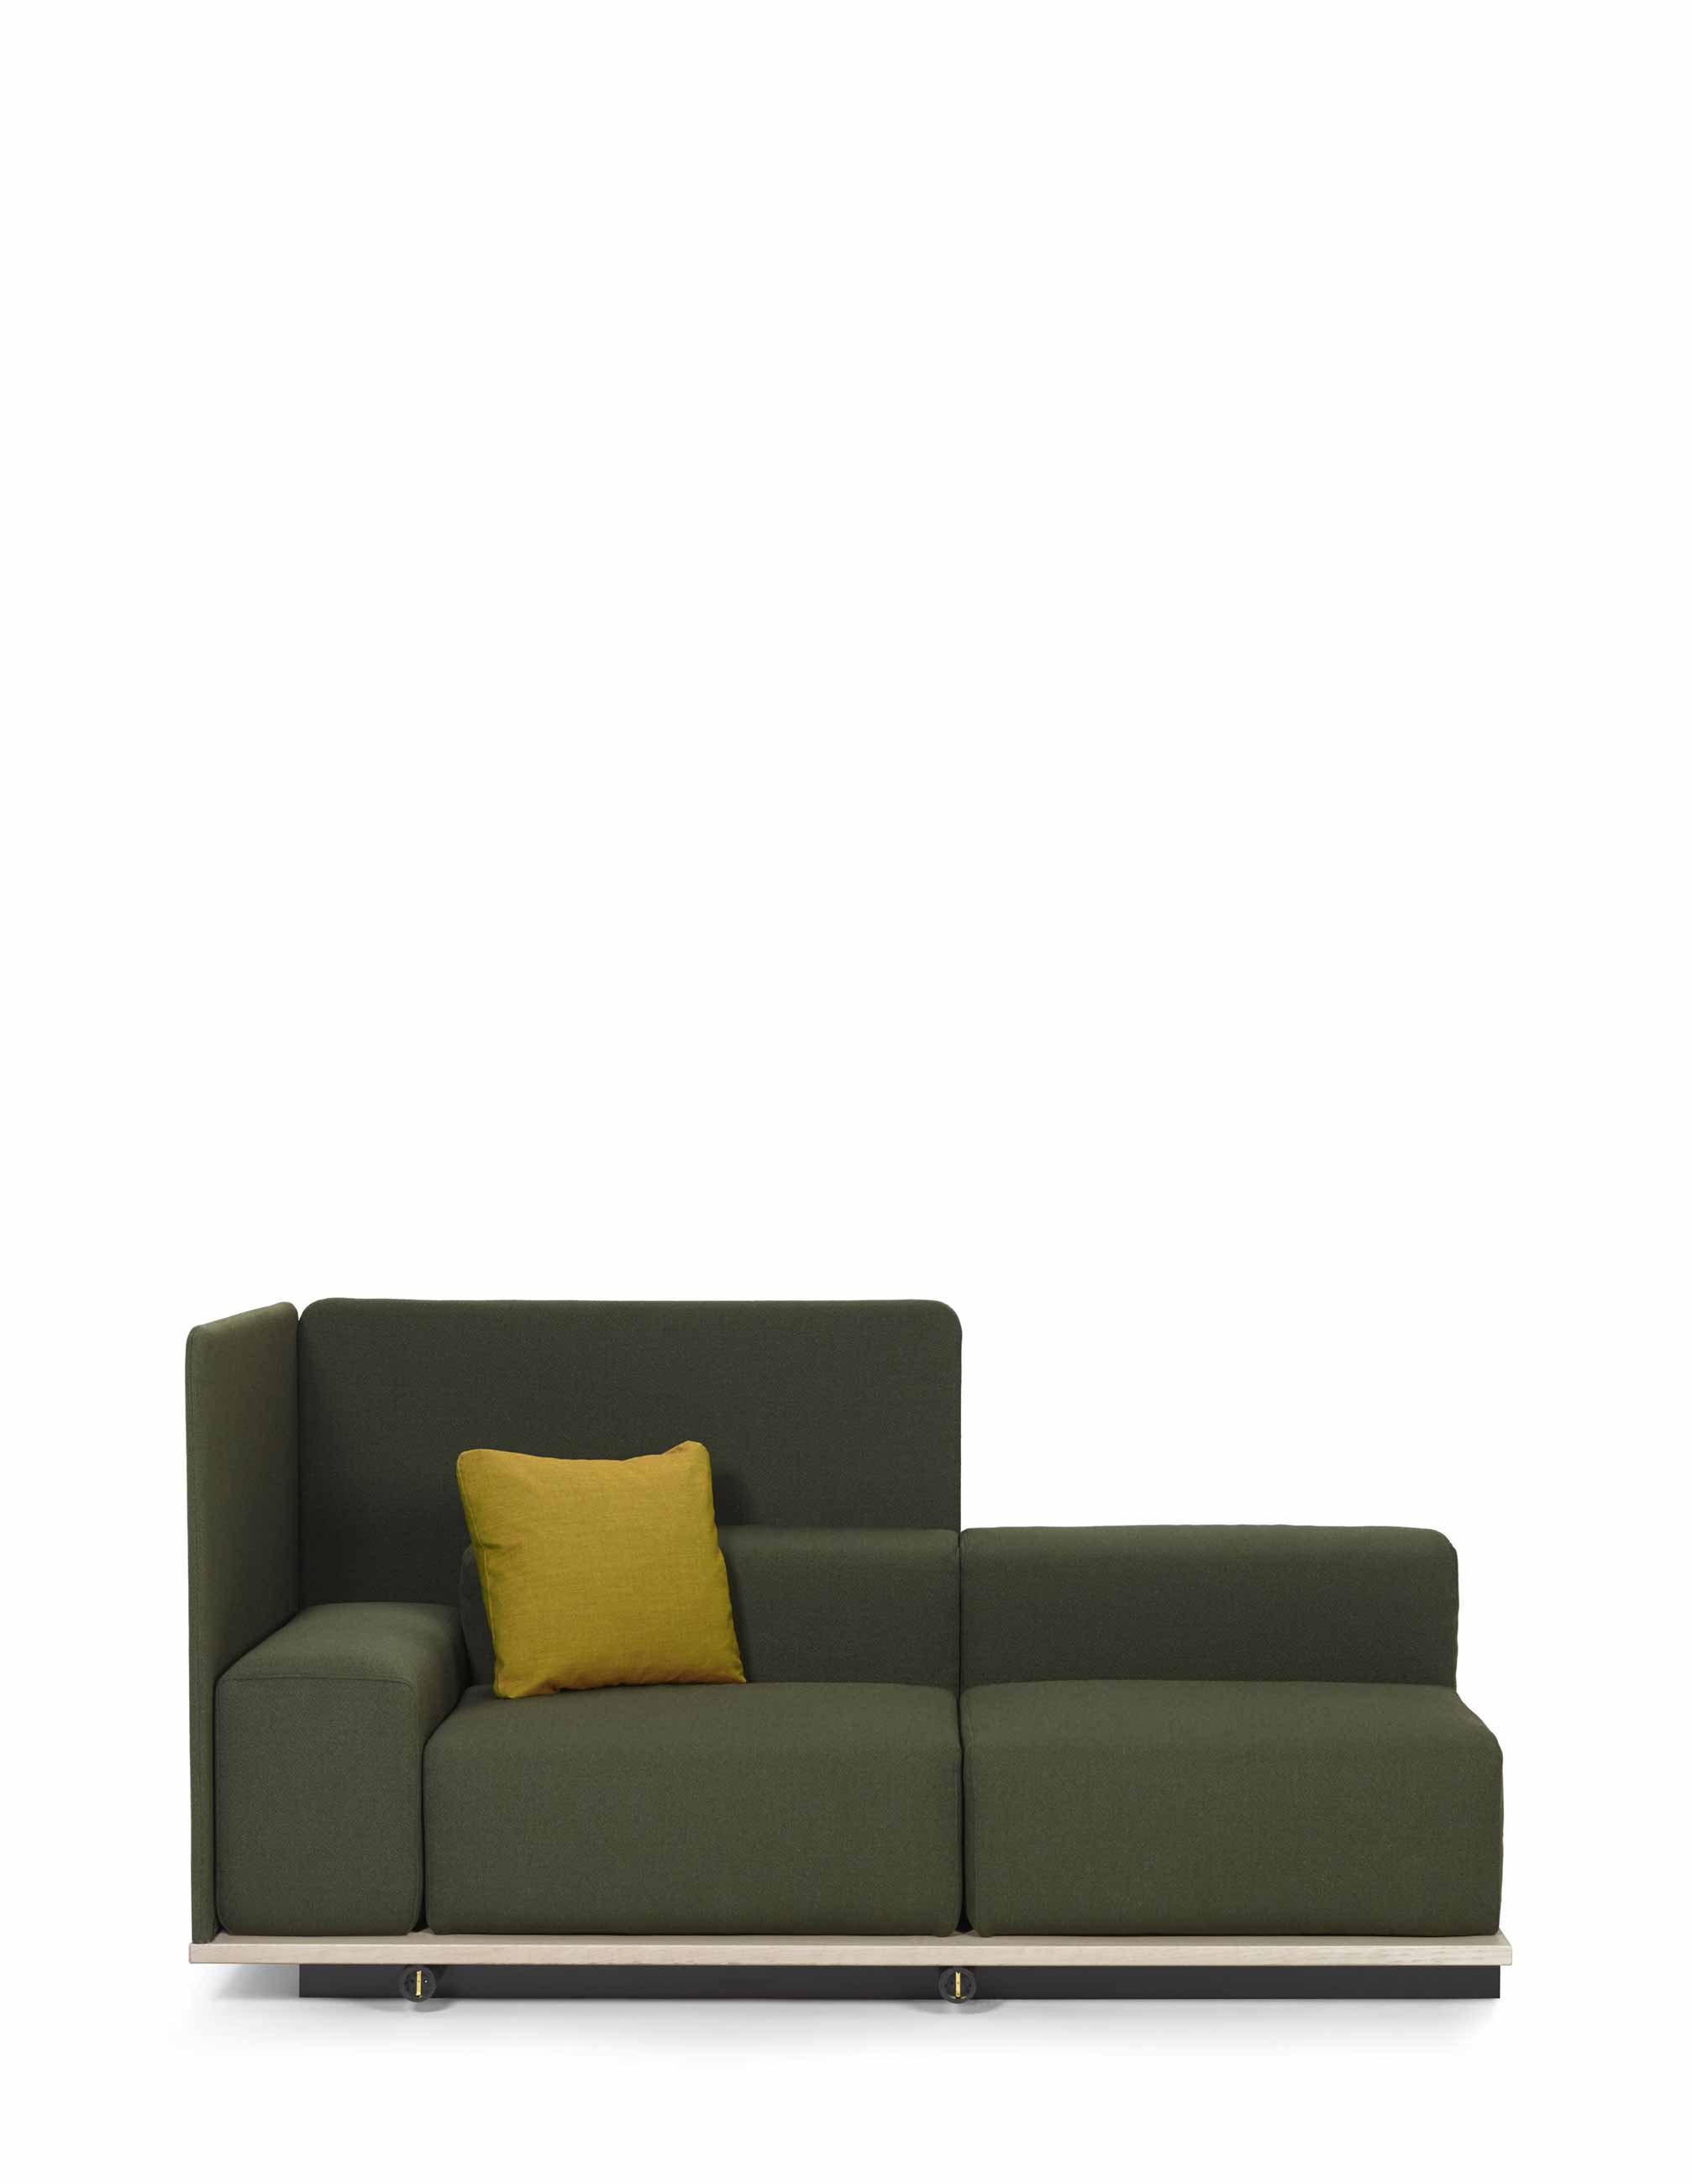 Offecct-Meet-picture